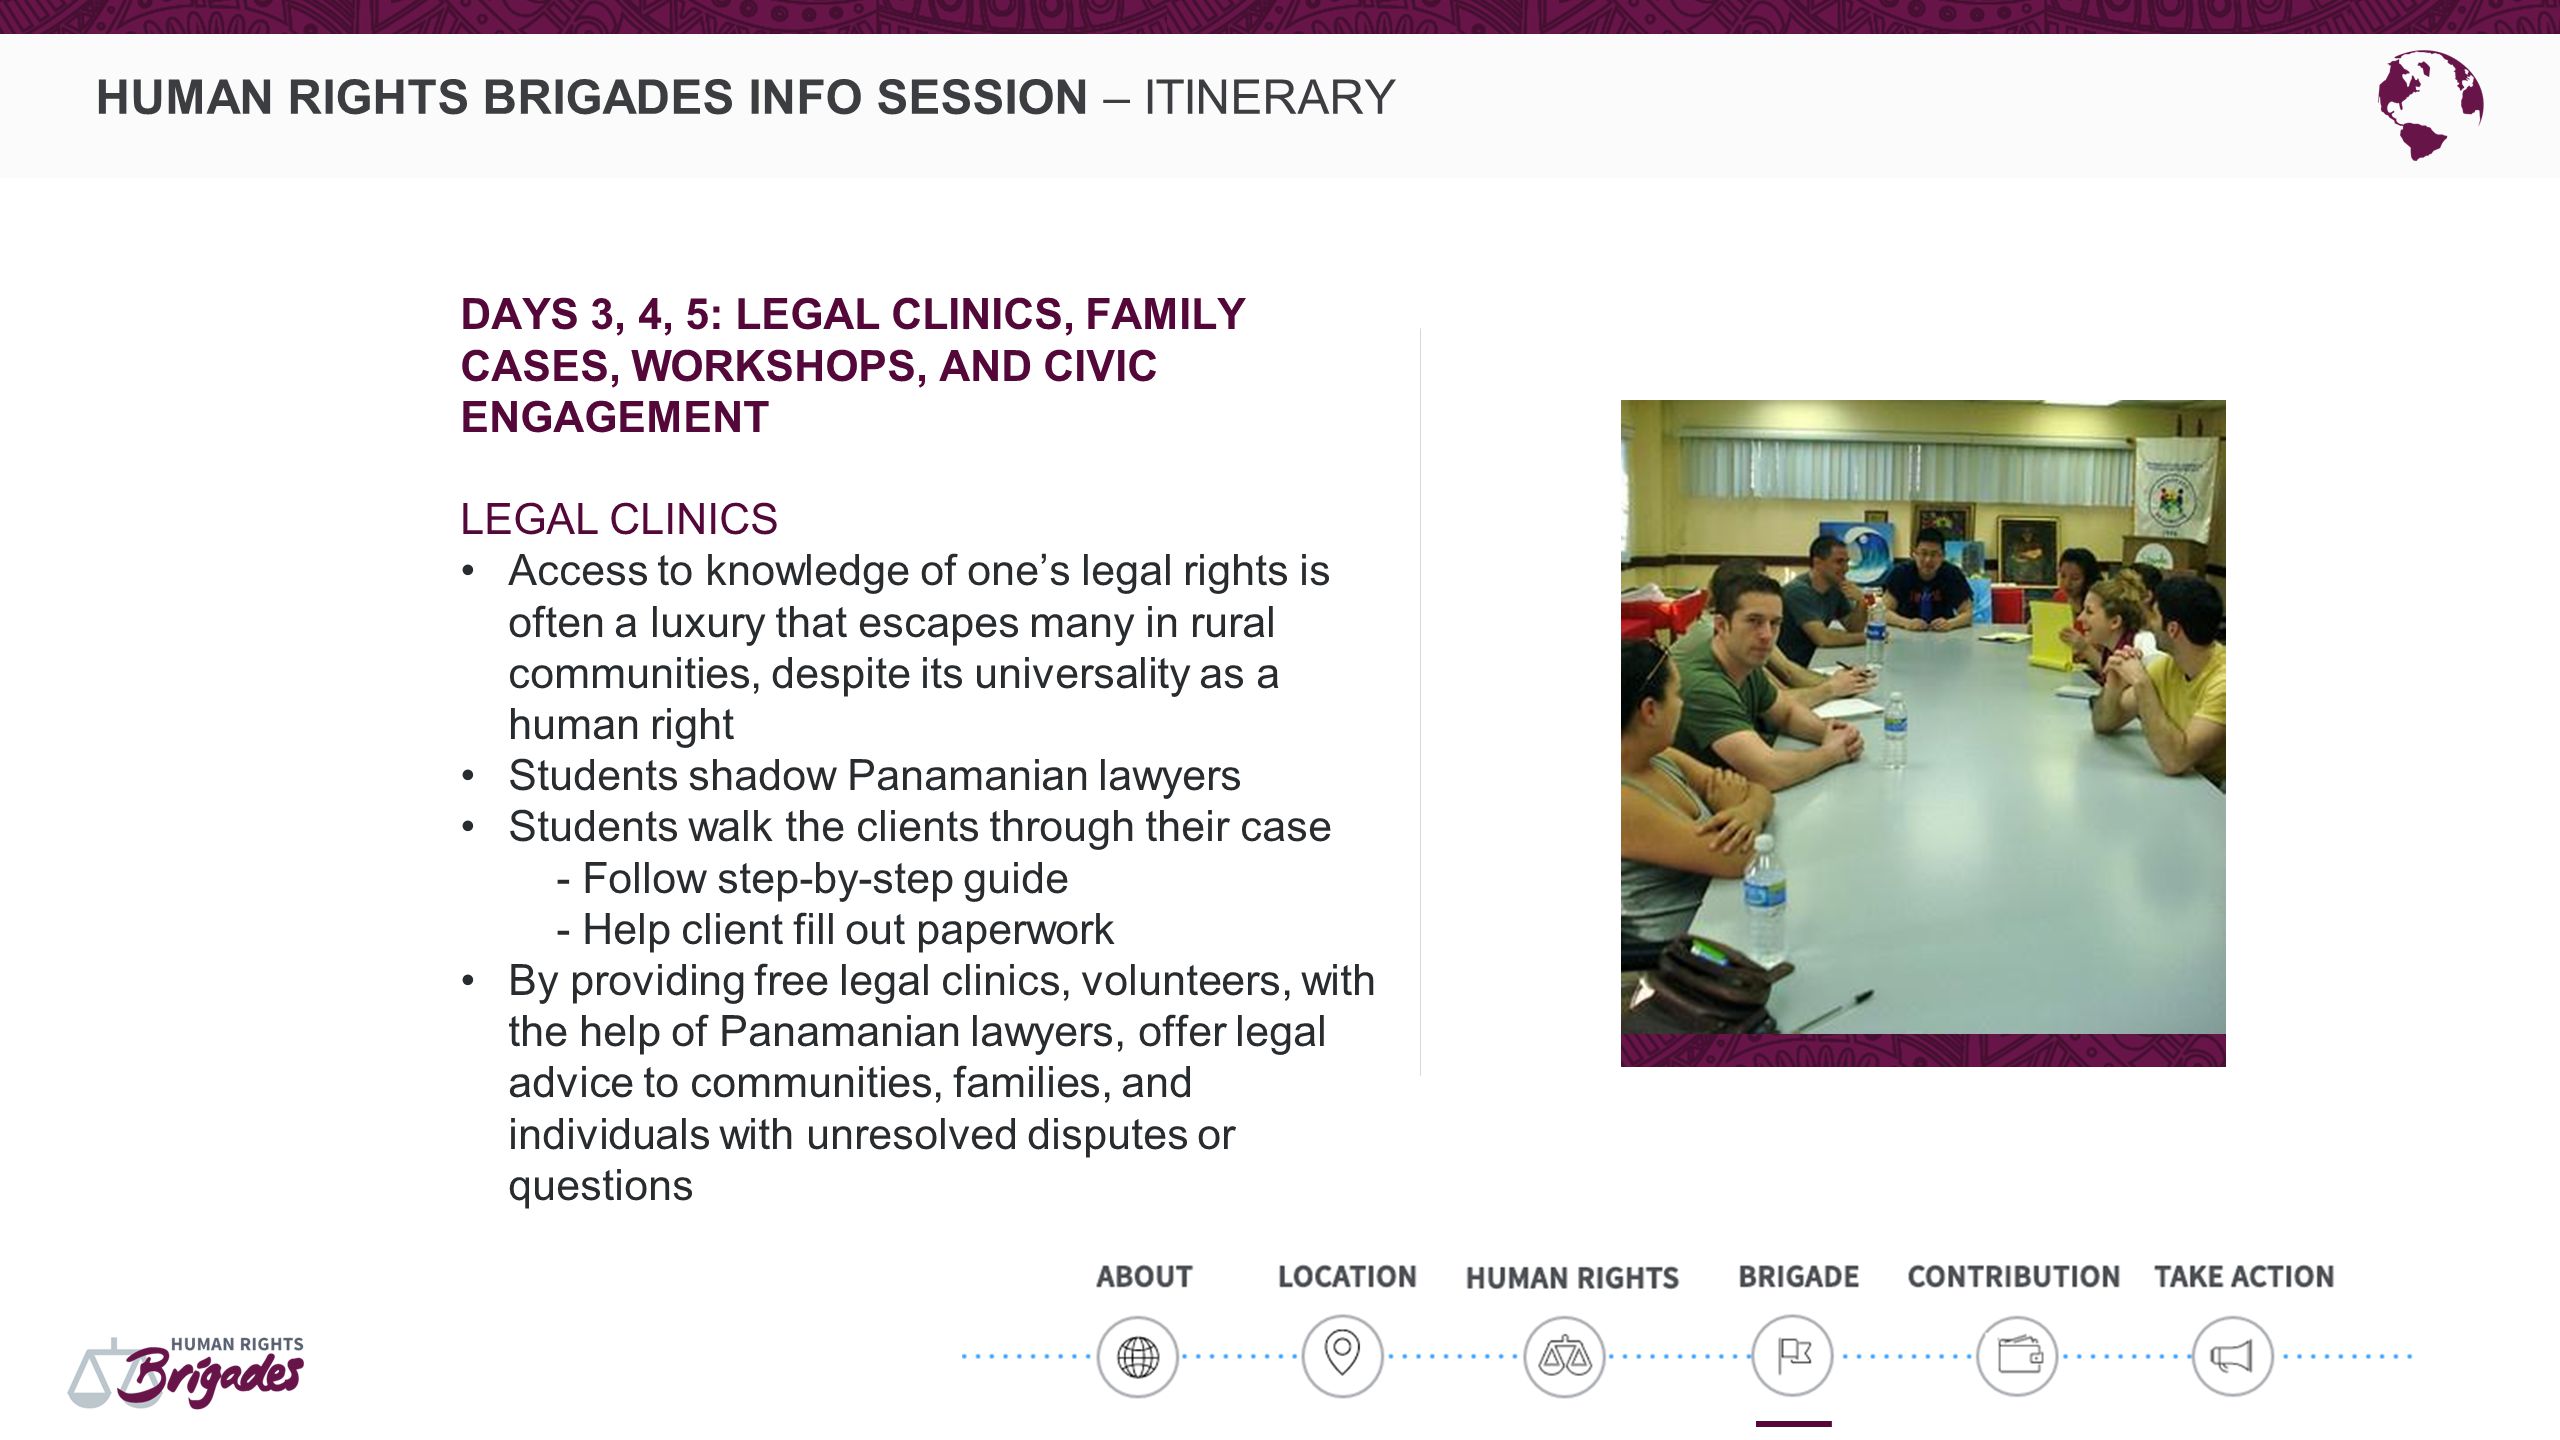 HUMAN RIGHTS BRIGADES INFO SESSION – ITINERARY DAYS 3, 4, 5: LEGAL CLINICS, FAMILY CASES, WORKSHOPS, AND CIVIC ENGAGEMENT LEGAL CLINICS Access to knowledge of one’s legal rights is often a luxury that escapes many in rural communities, despite its universality as a human right Students shadow Panamanian lawyers Students walk the clients through their case - Follow step-by-step guide - Help client fill out paperwork By providing free legal clinics, volunteers, with the help of Panamanian lawyers, offer legal advice to communities, families, and individuals with unresolved disputes or questions